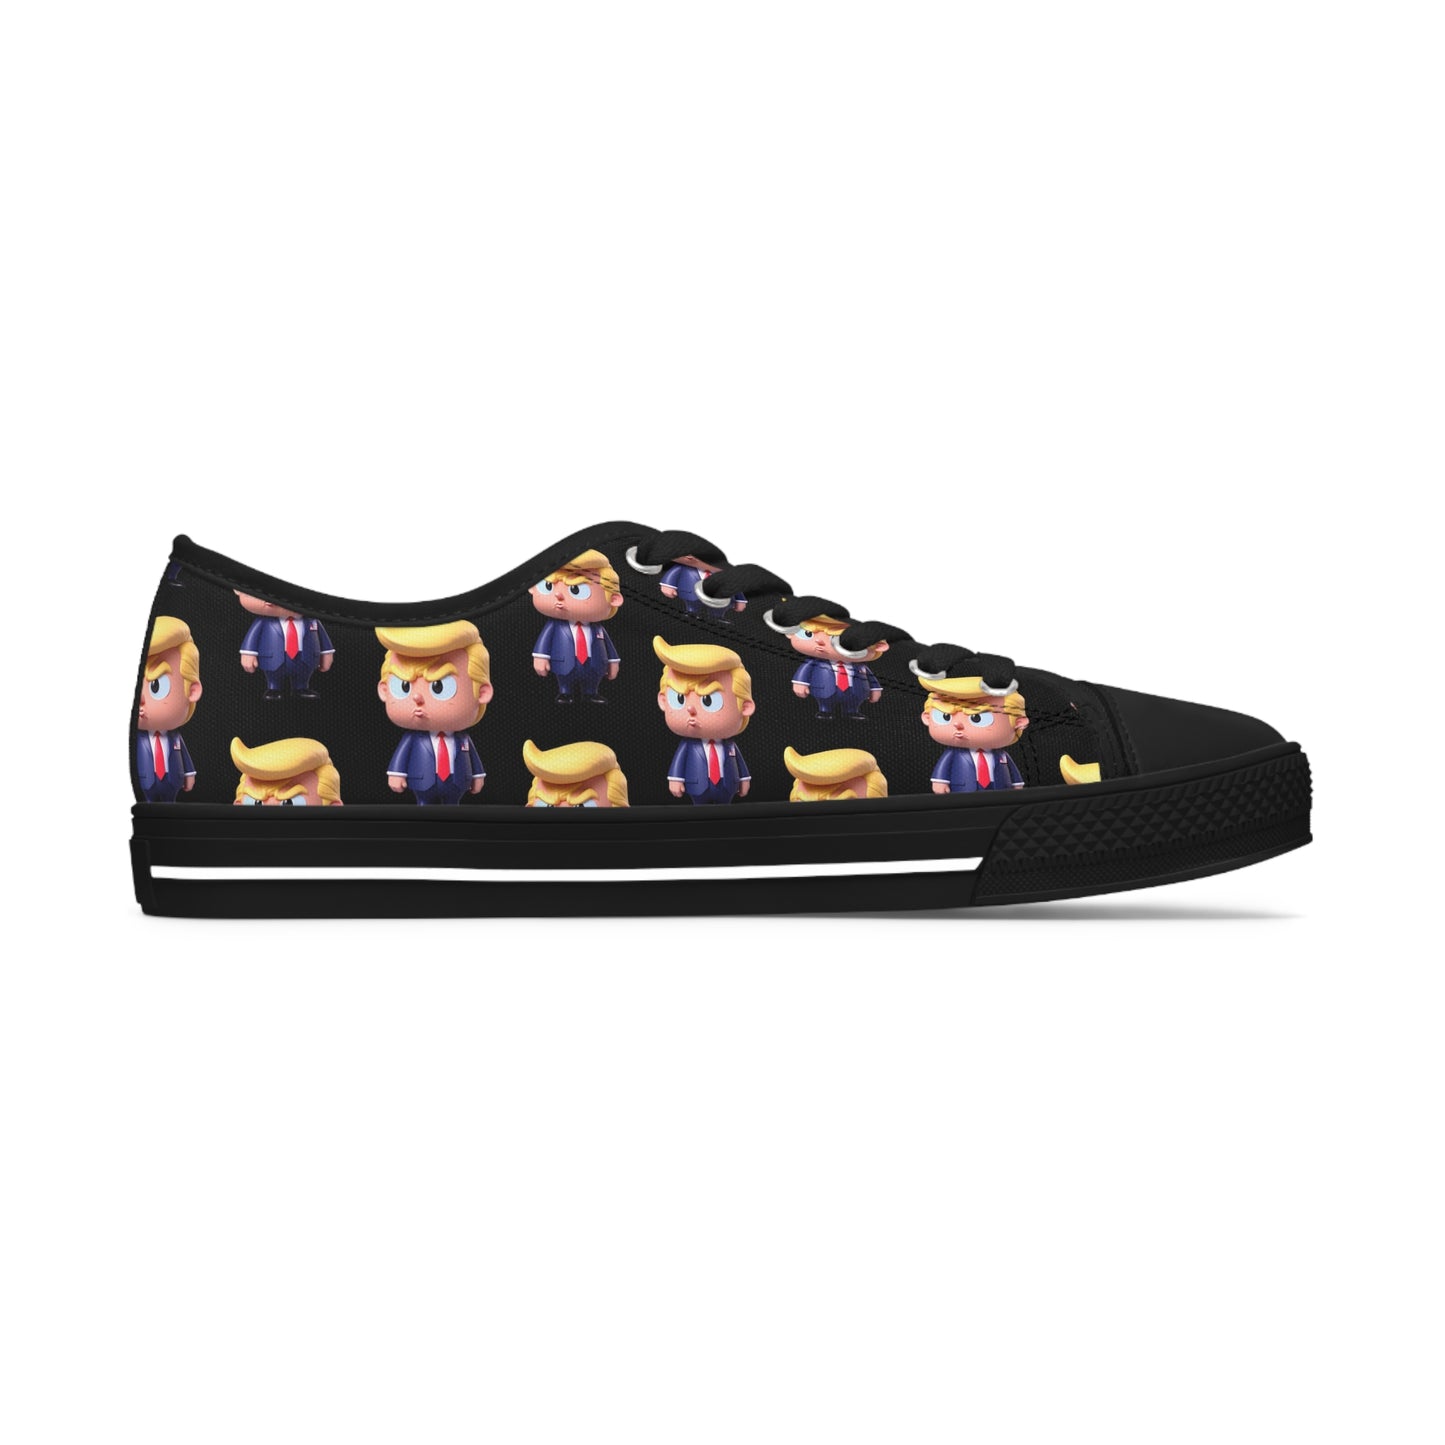 Little Trump all over Print black Women's Low Top Sneakers Shoes